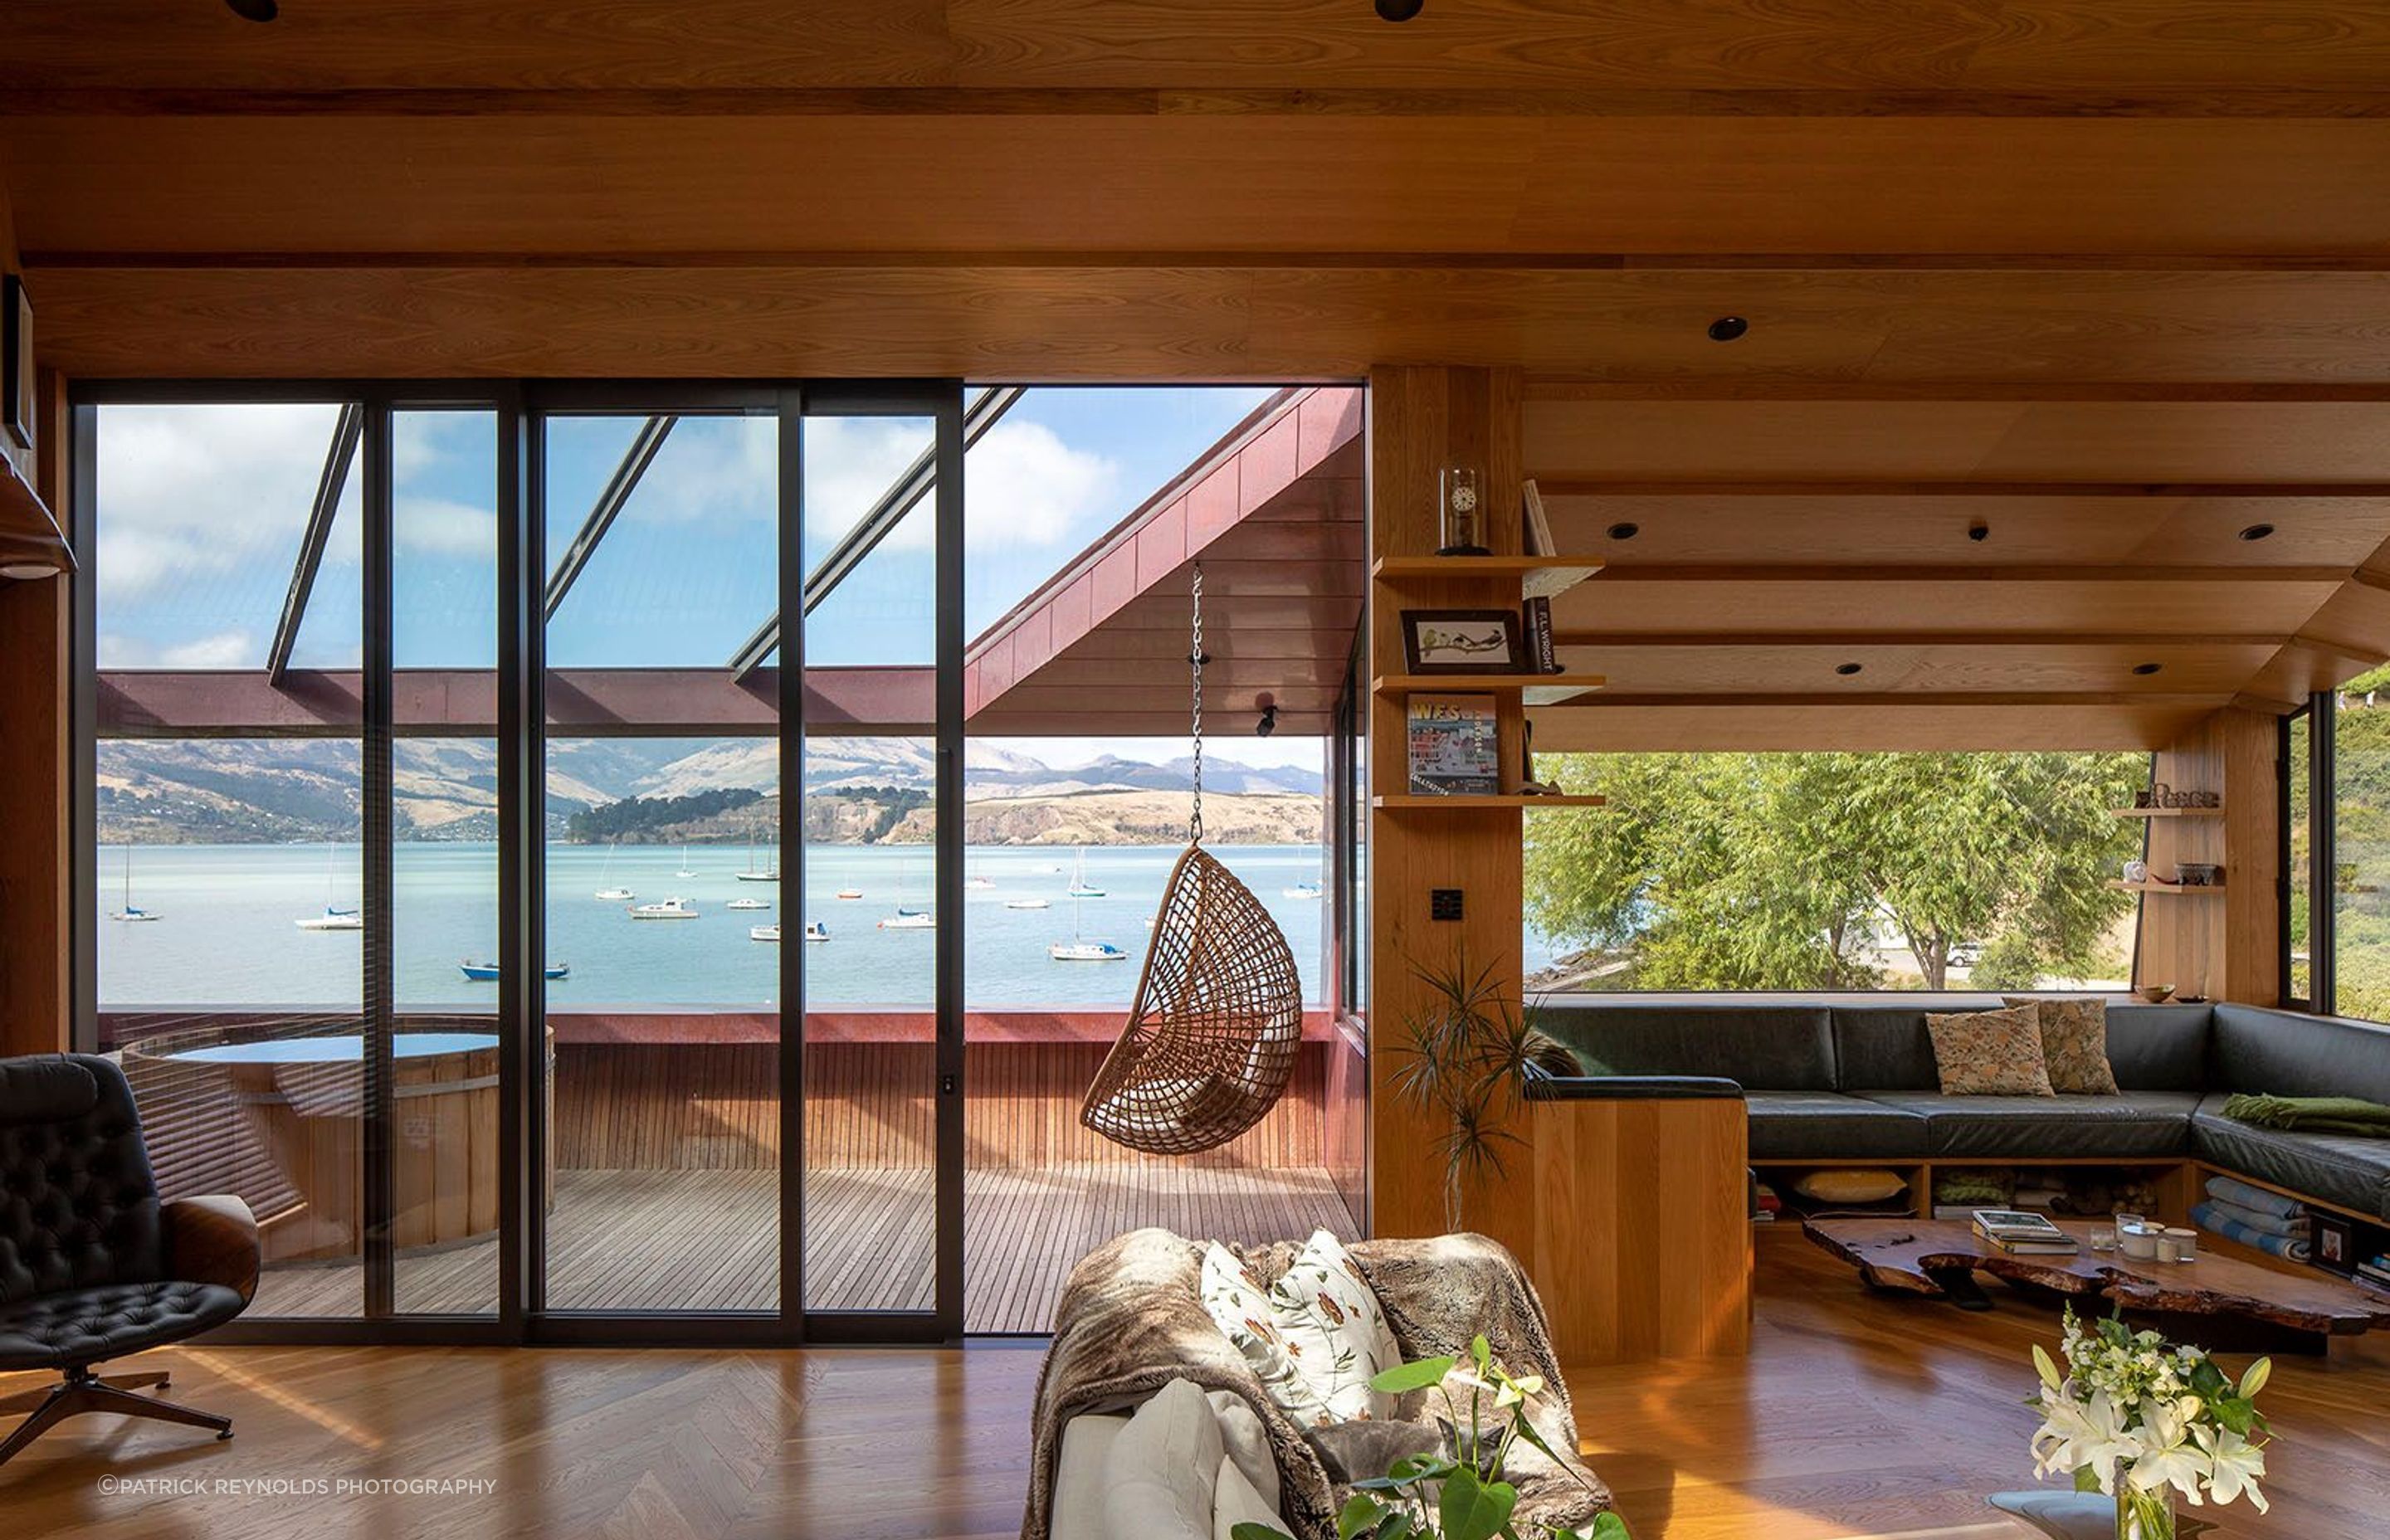 The Green family had long wanted to live in Lyttelton’s Cass Bay. The decorative parquet flooring is a representation of the mountainous ridgeline behind the home – JSC Timber supplied all timber finishes for the home. The spa on the deck is from Colonial Hot Tubs.